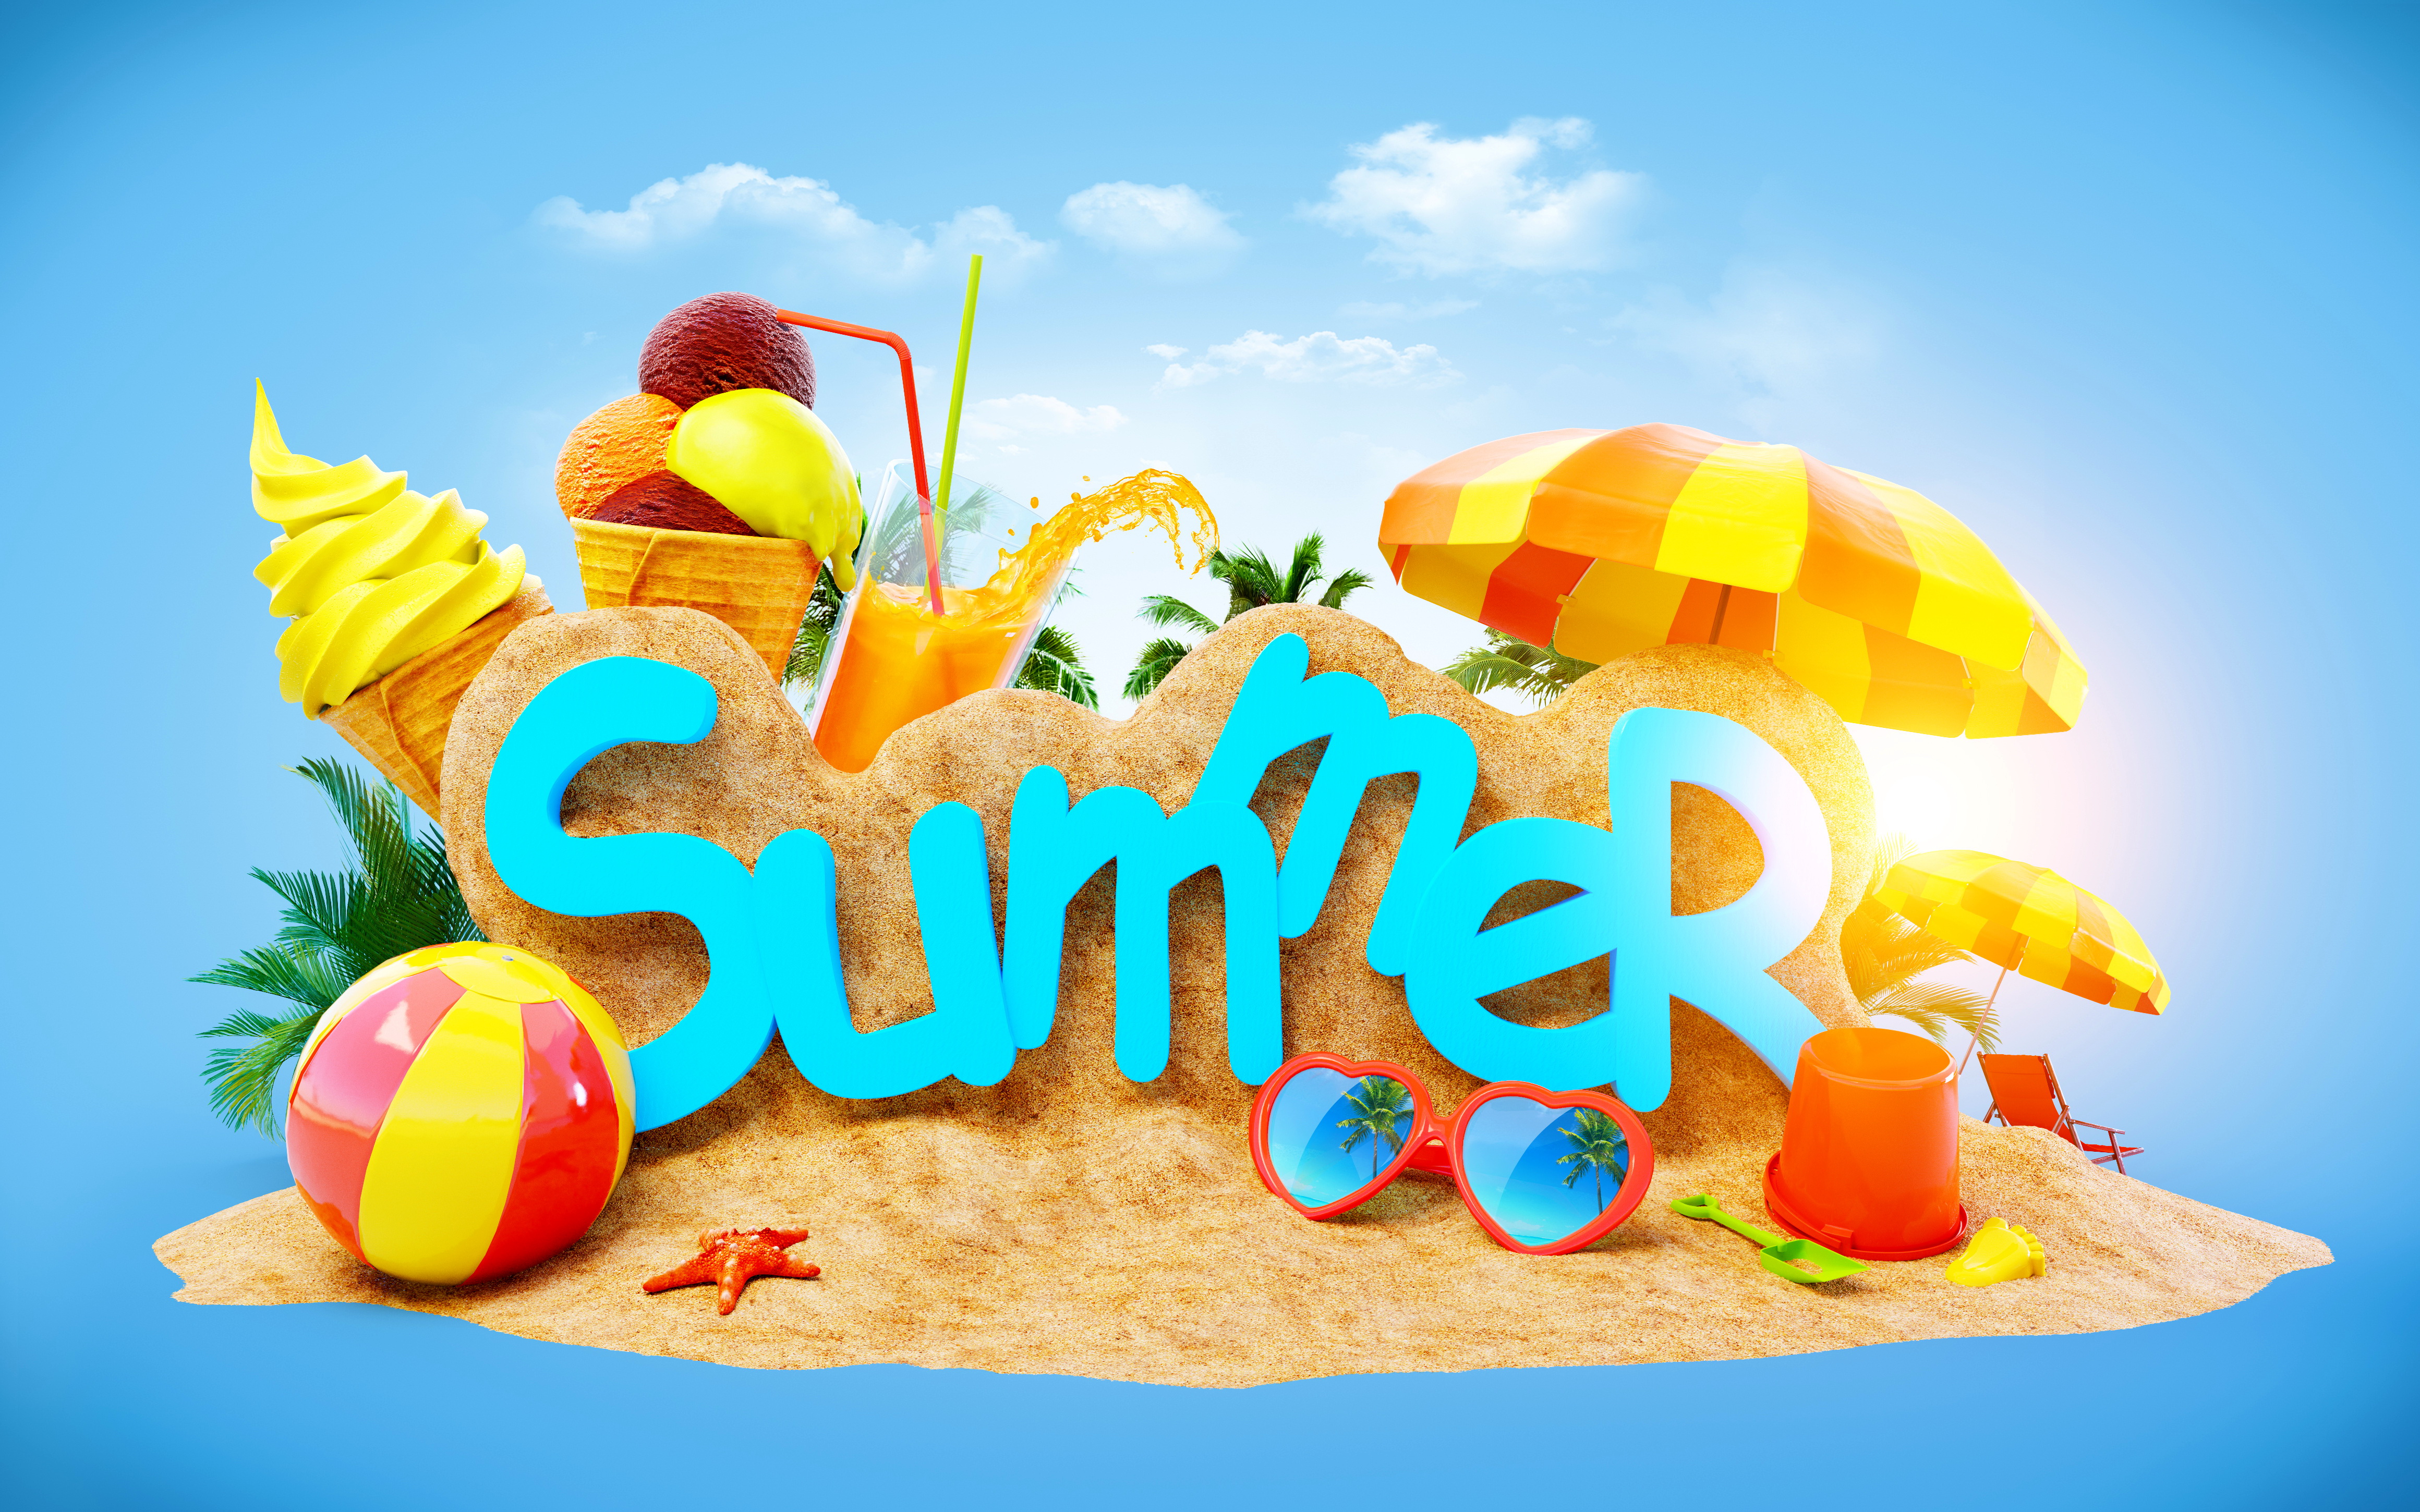 Free Download Summer Vacation Wallpapers High Quality Hd Pics Hd X For Your Desktop